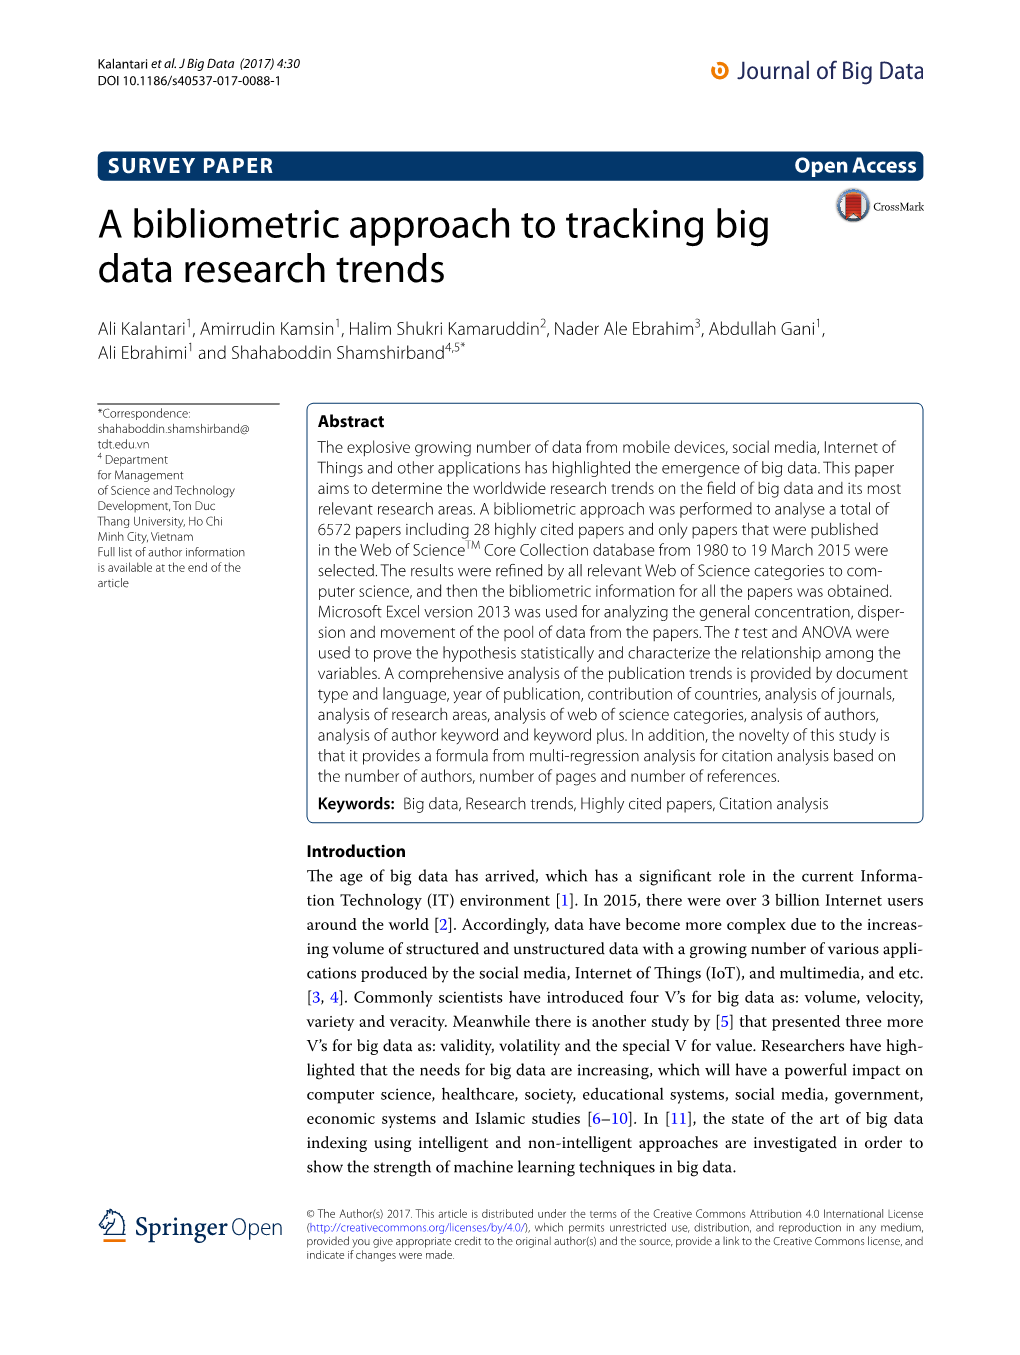 A Bibliometric Approach to Tracking Big Data Research Trends